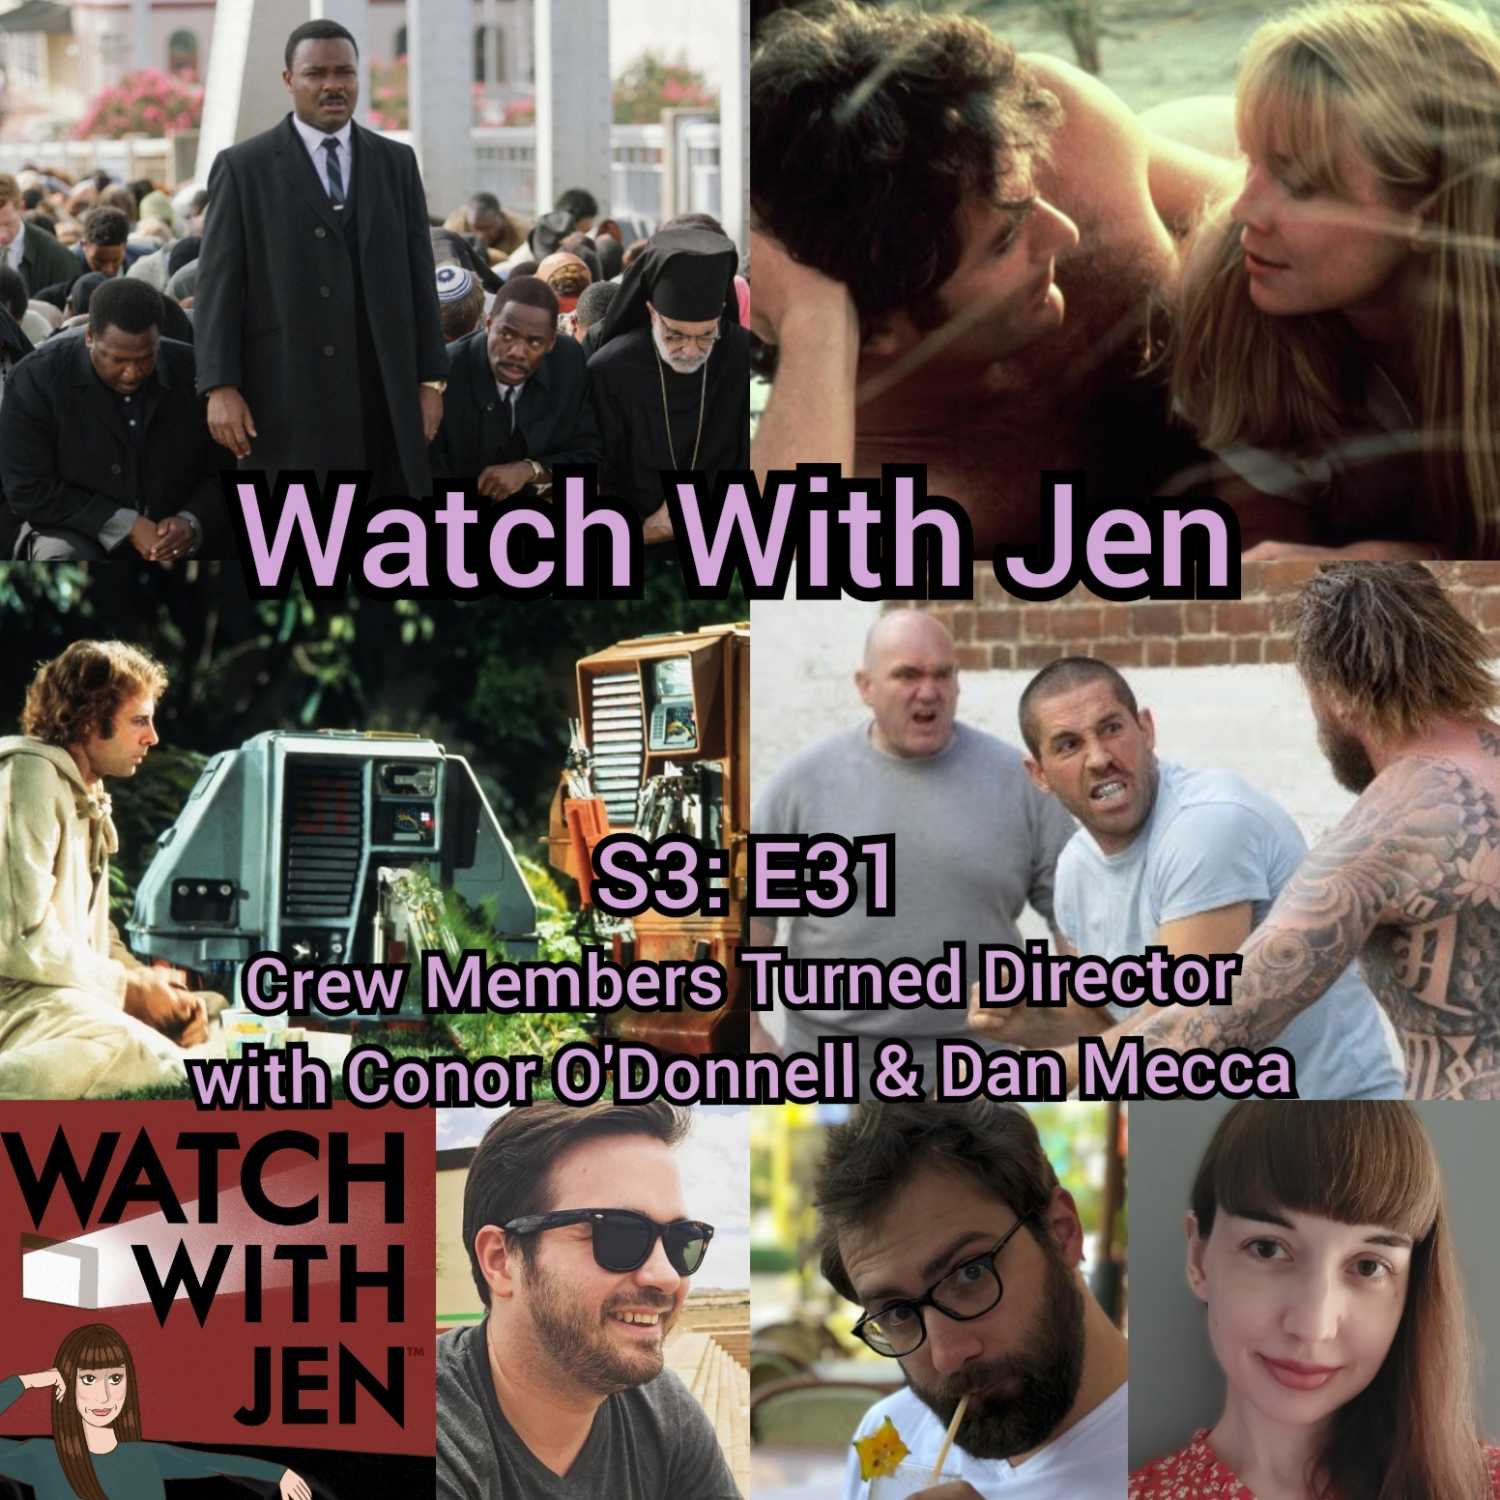 Watch With Jen - S3: E31 - Crew Members Turned Director with Conor O'Donnell & Dan Mecca